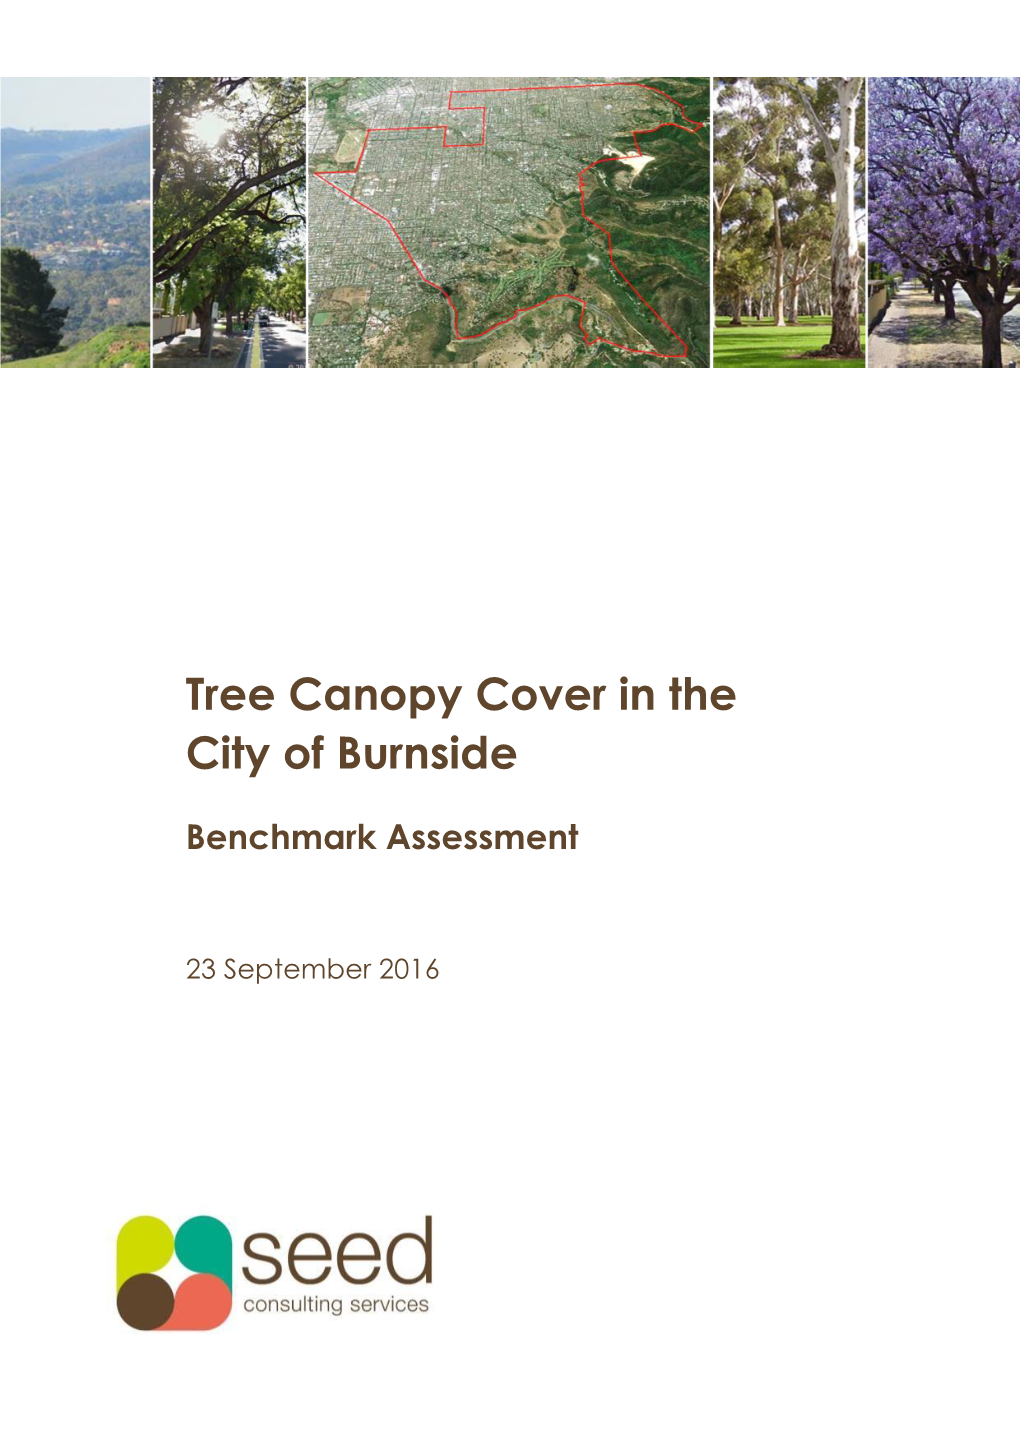 Tree Canopy Cover in the City of Burnside